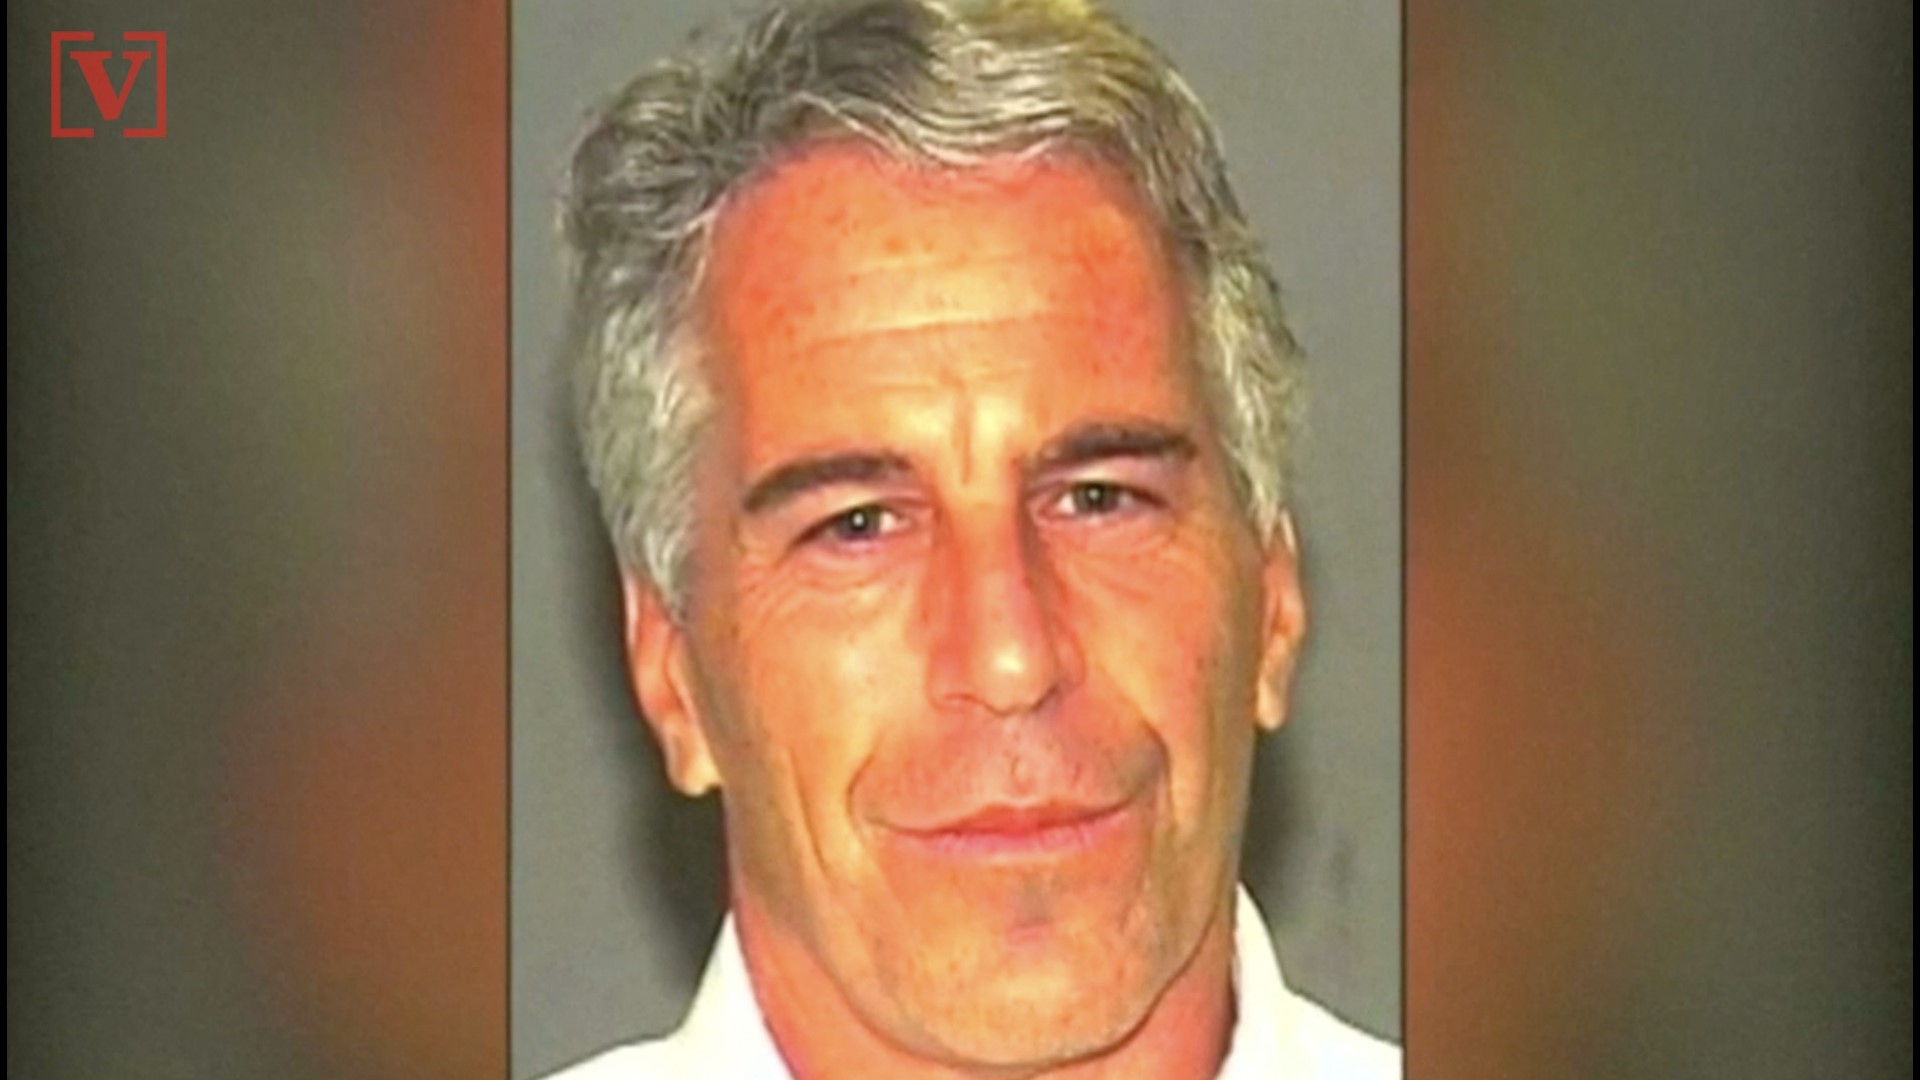 Judge Ends Case Against Jeffrey Epstein With A Nod To The Accusers